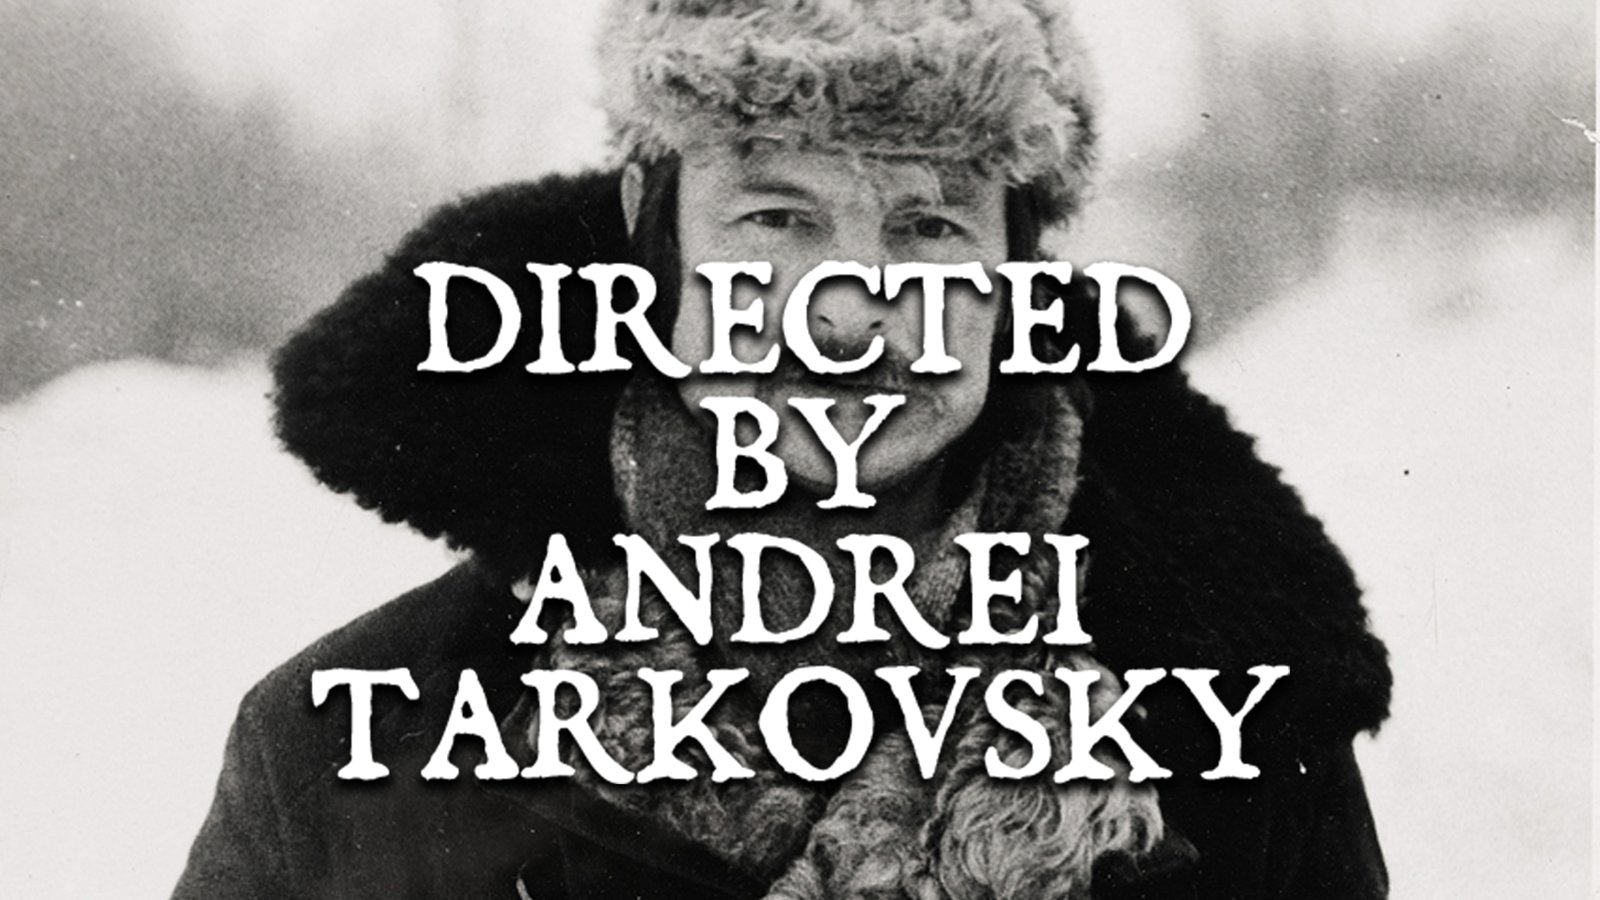 Directed by Andrei Tarkovsky - The Life and Career of Russian Auteur Andrei Tarkovsky